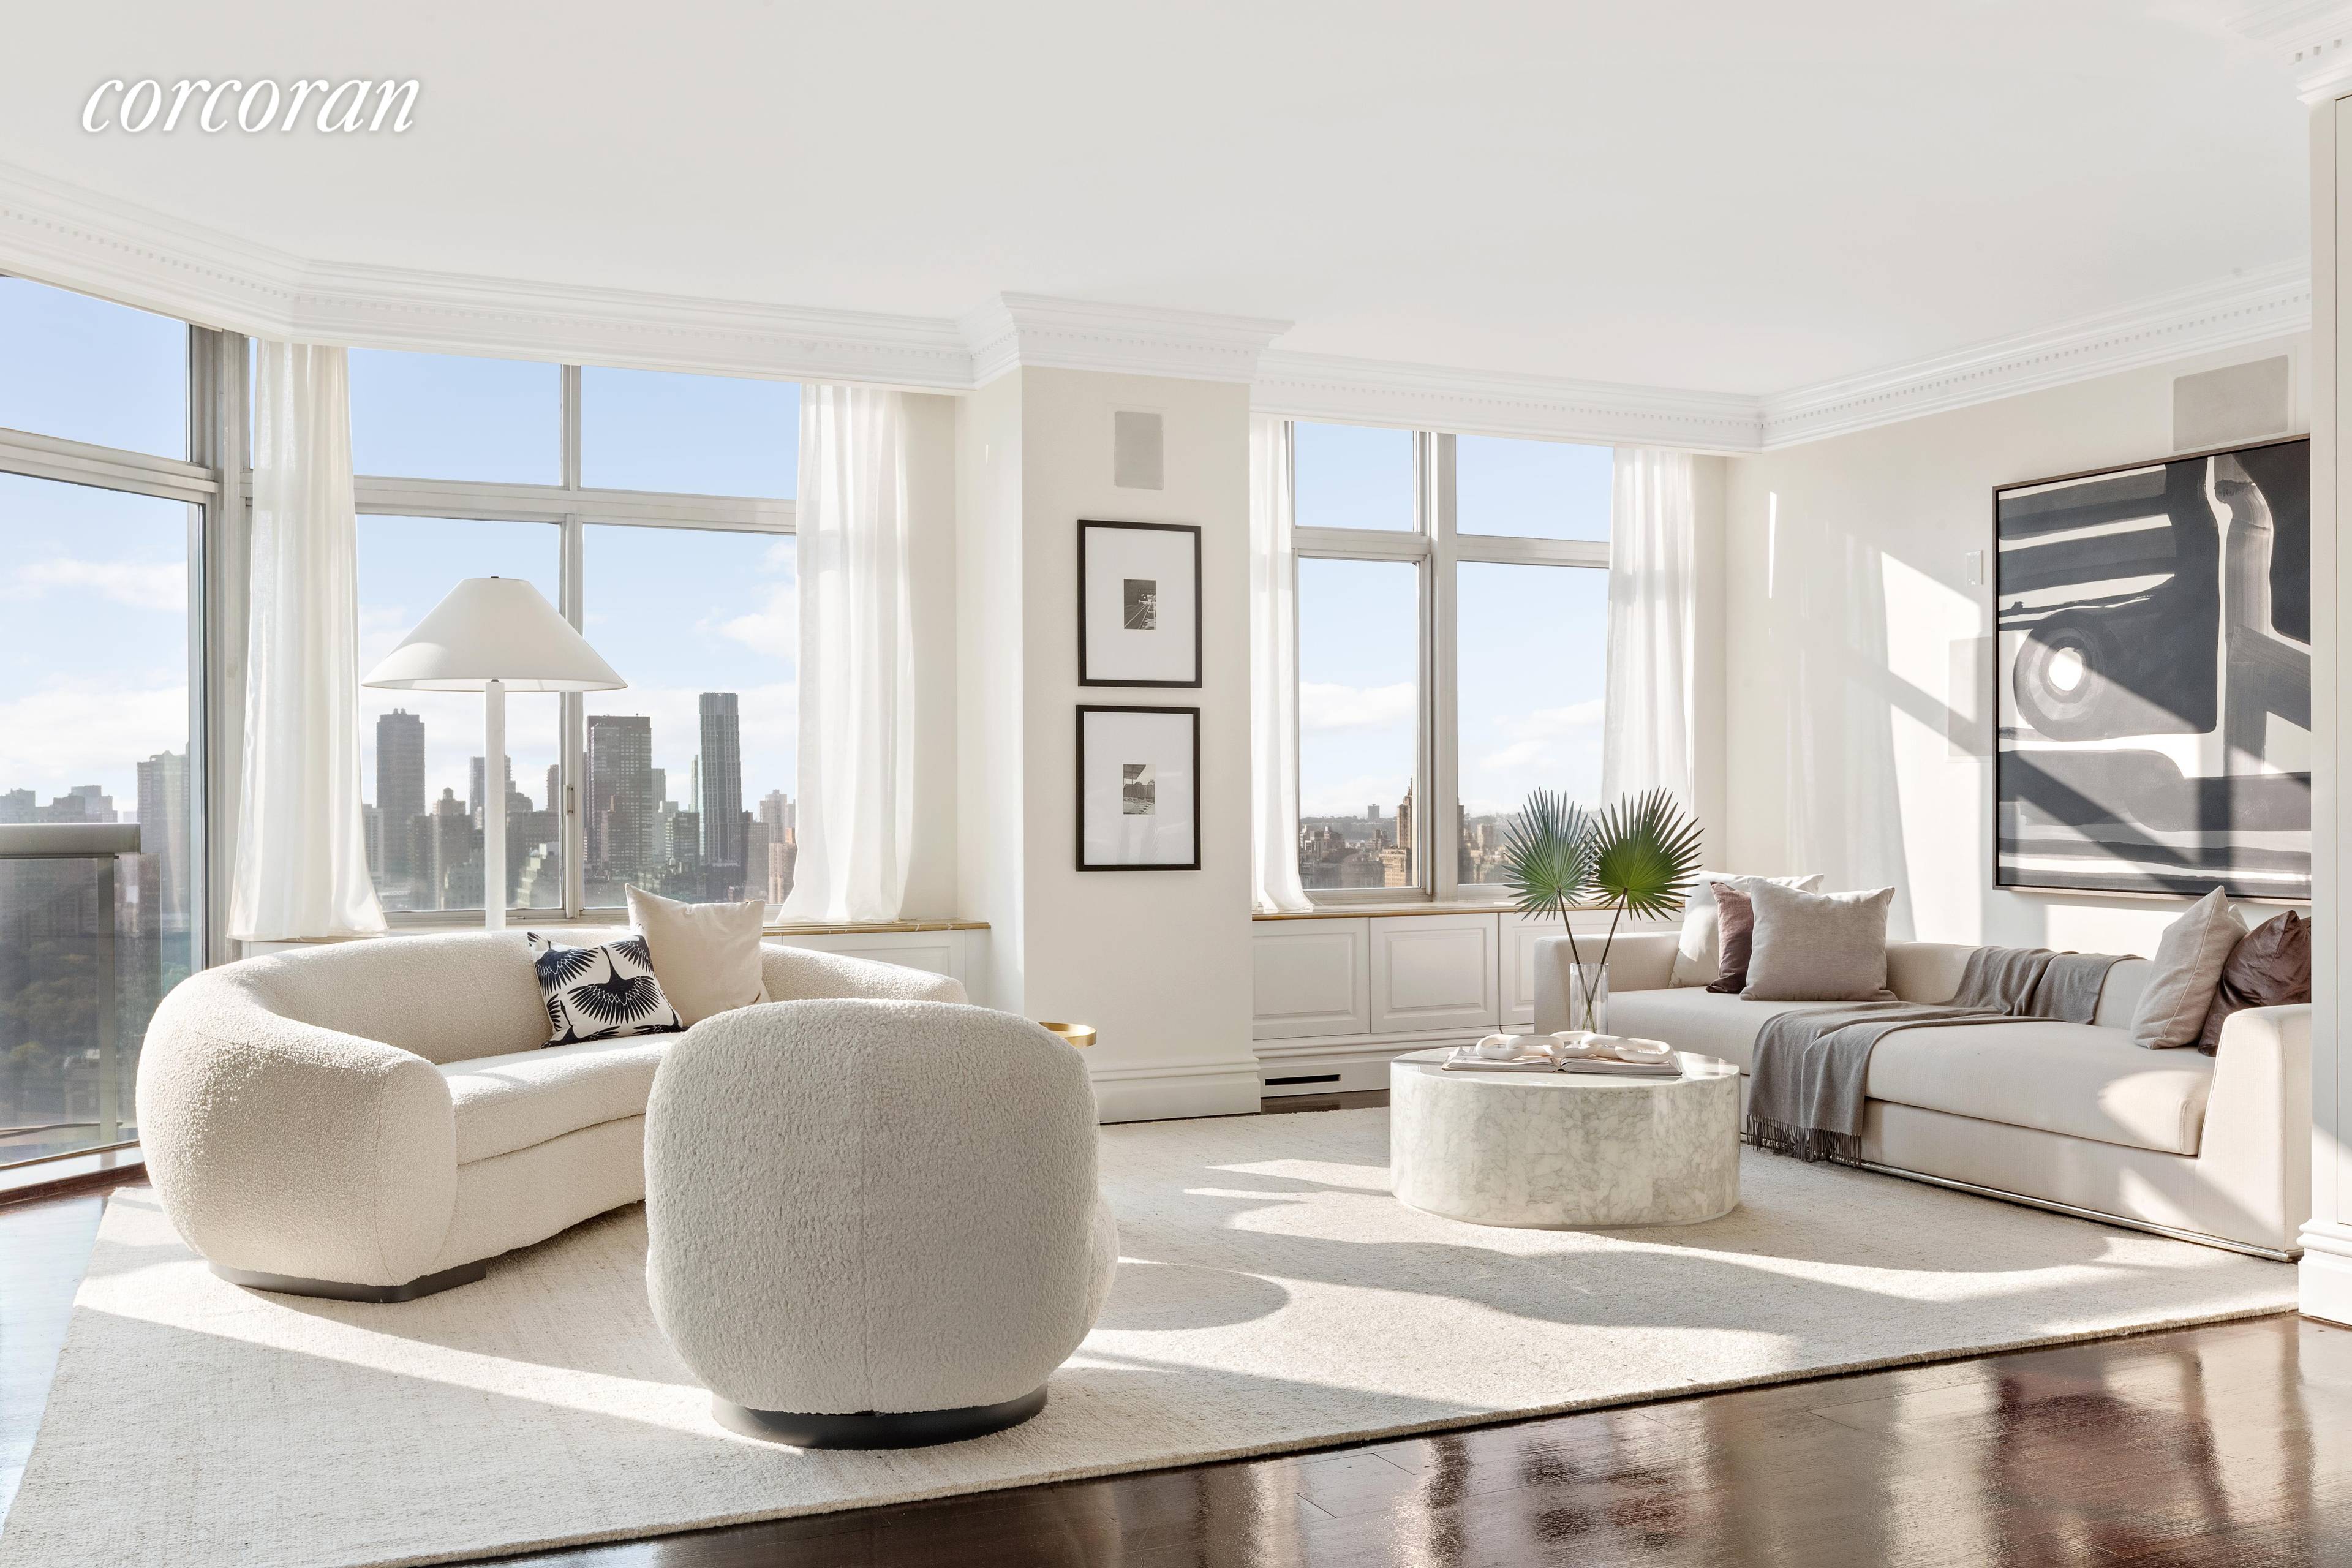 This exceptional, 5, 020 square foot duplex, 6 bedroom is perched on the 34th and 35th floors of The Royale Condominium, located at 64th and Third Avenue.